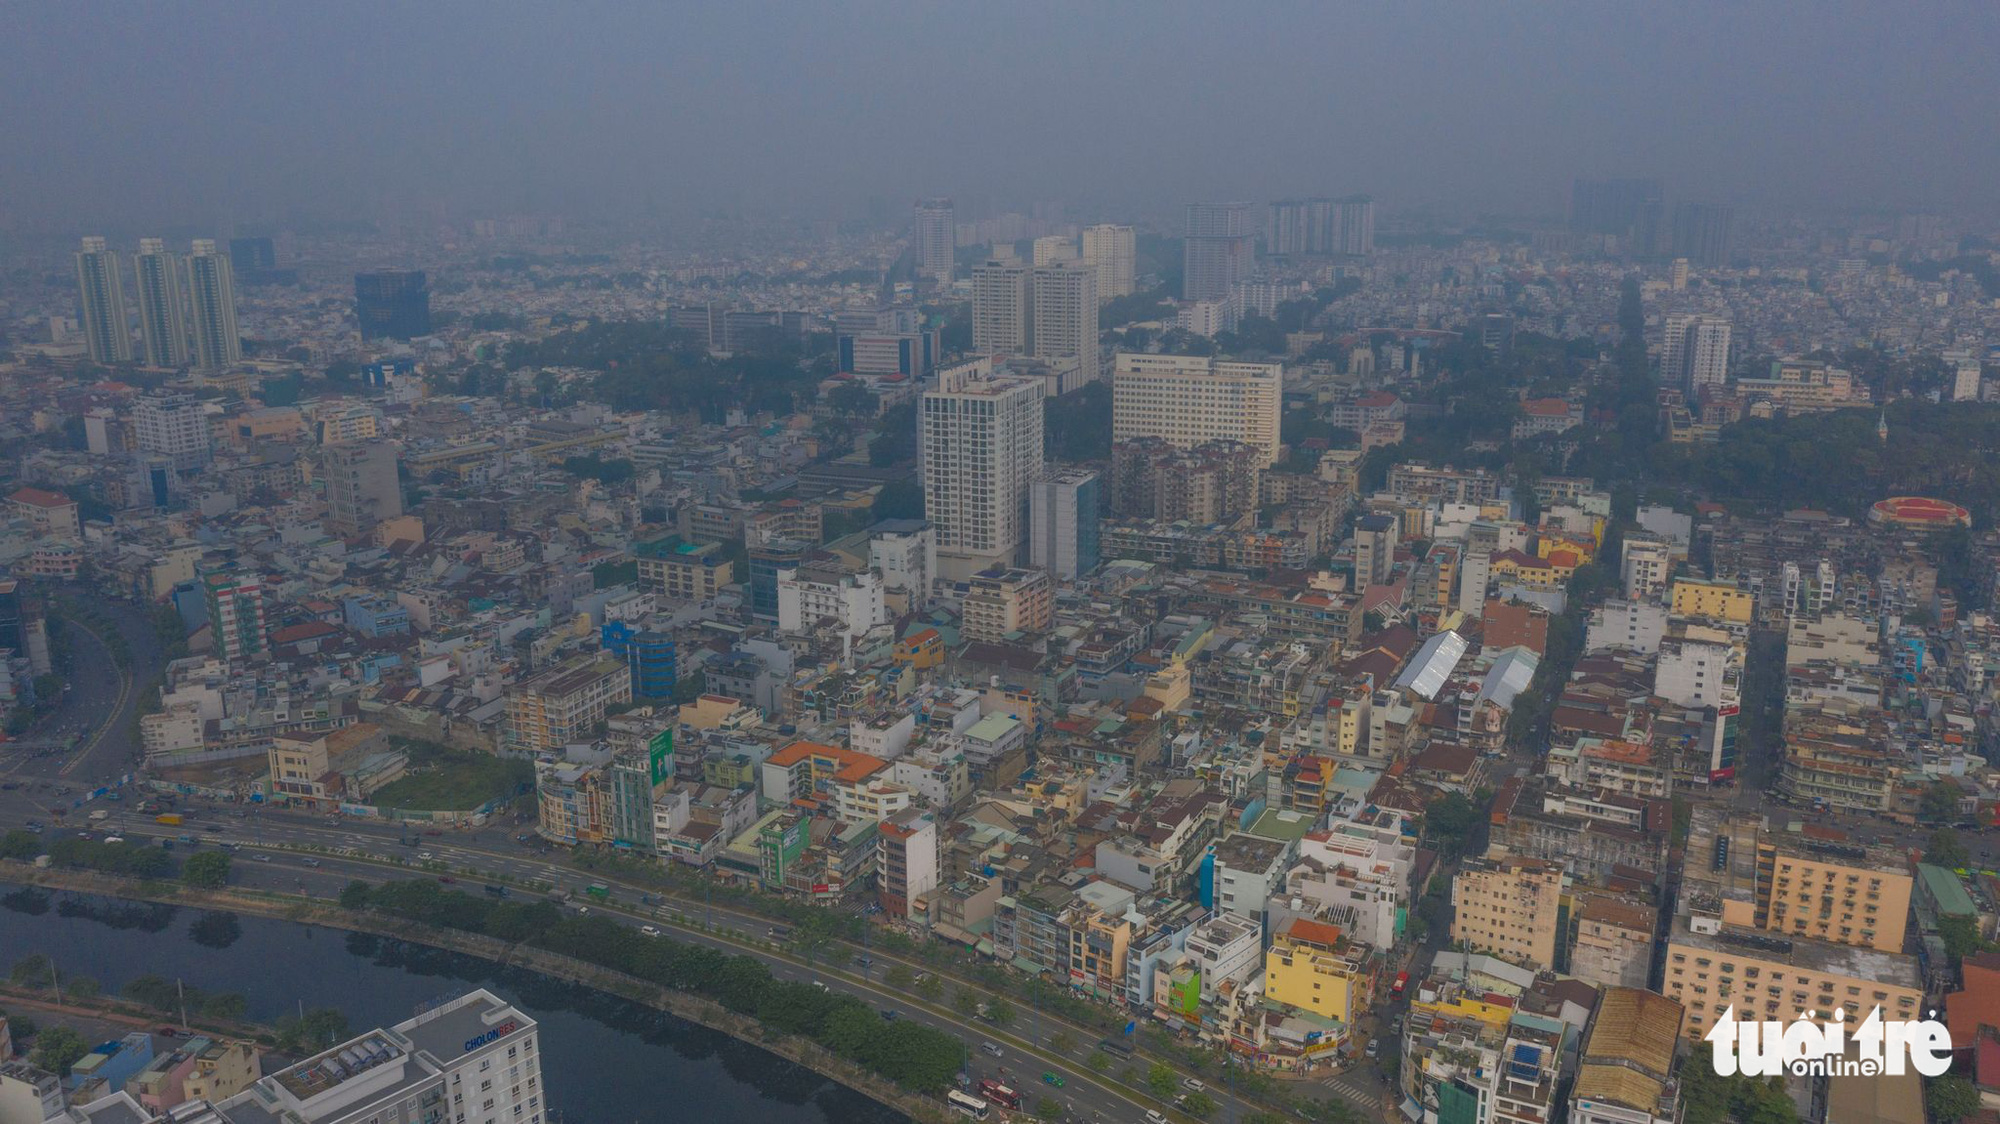 Unseasonal rain results in smoggy sky in Ho Chi Minh City: expert